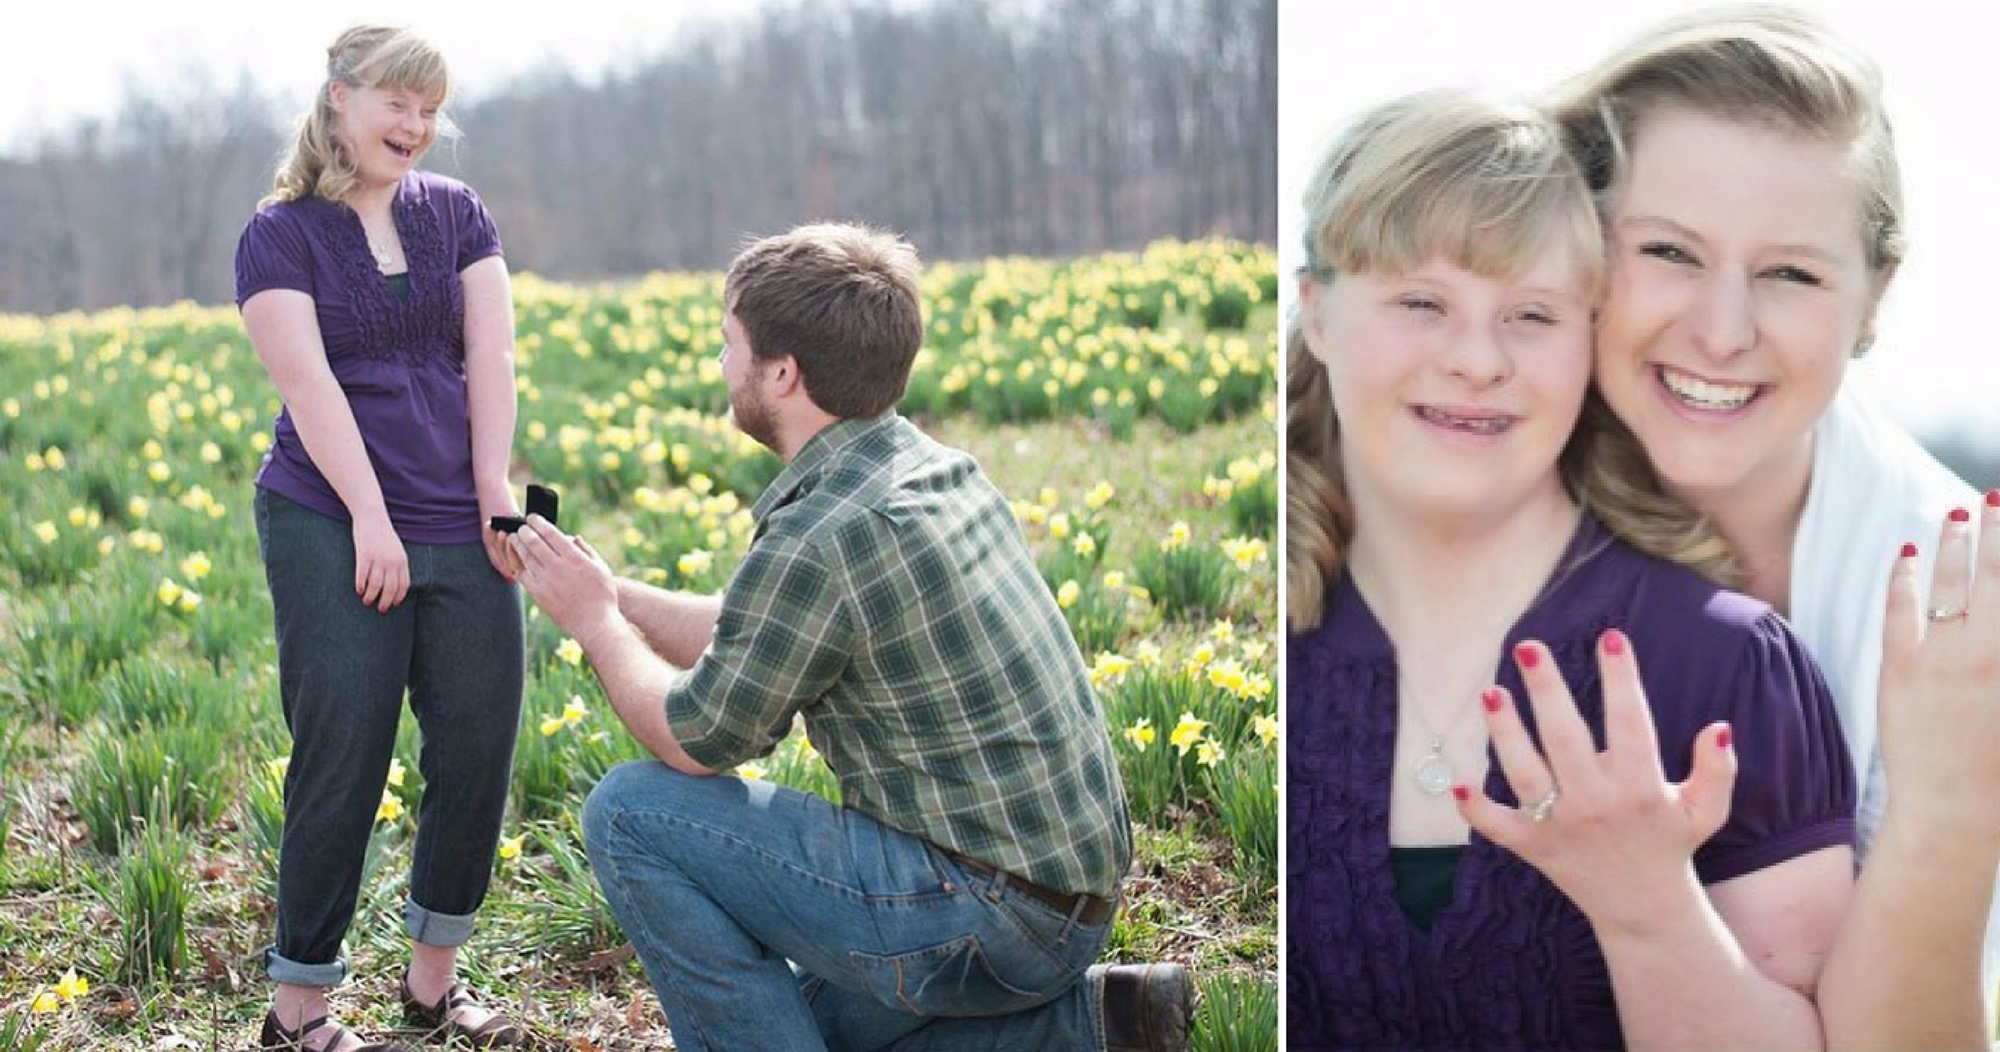 When A Man Proposed To His Girlfriend He Had A Ring For Her Sister Too